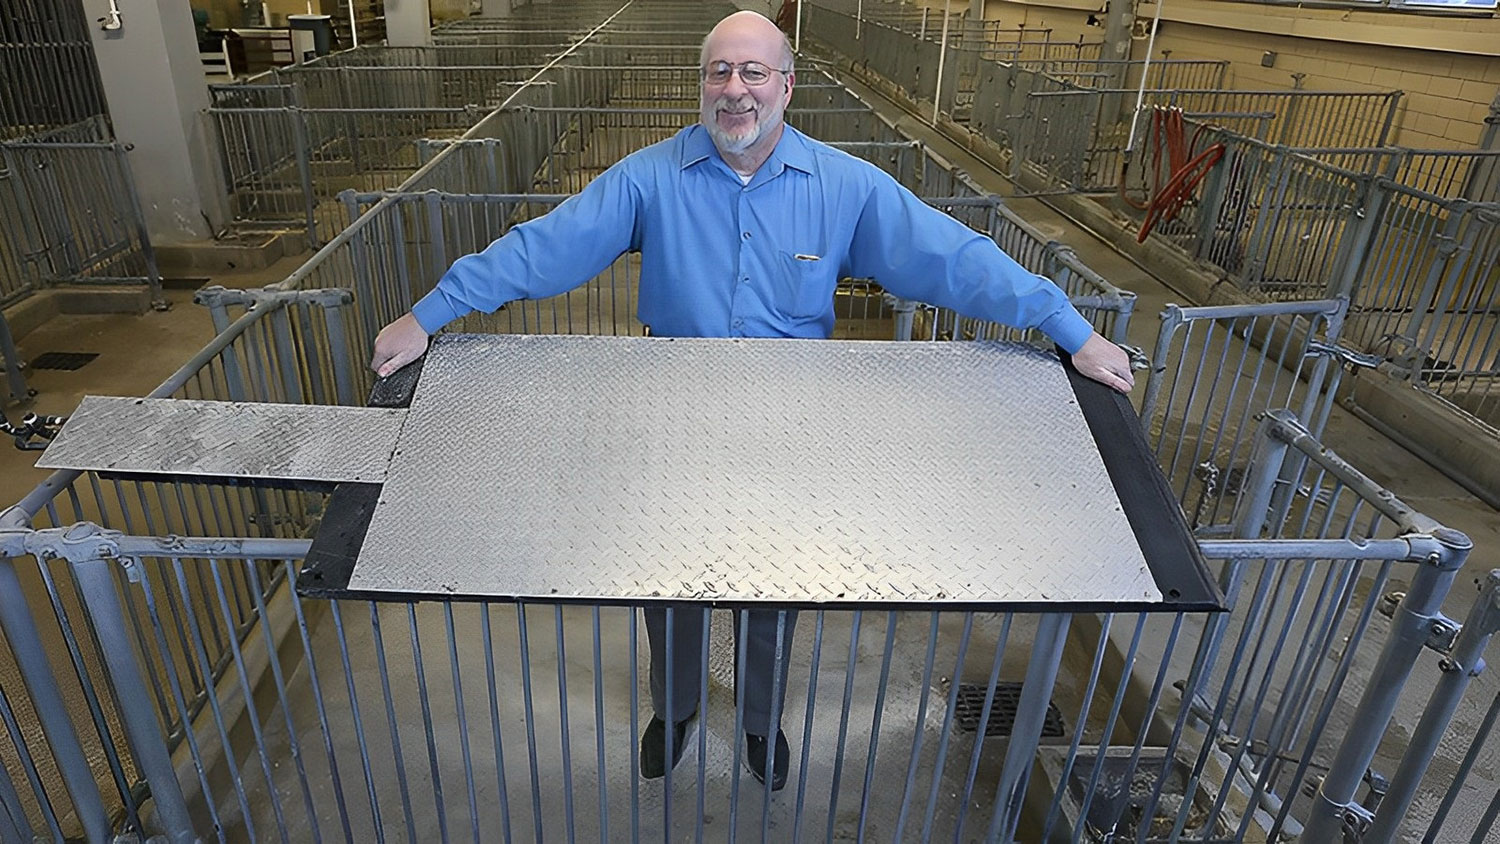 Purdue professor Robert M. Stwalley III shows a cooling pad designed to keep hogs cool.